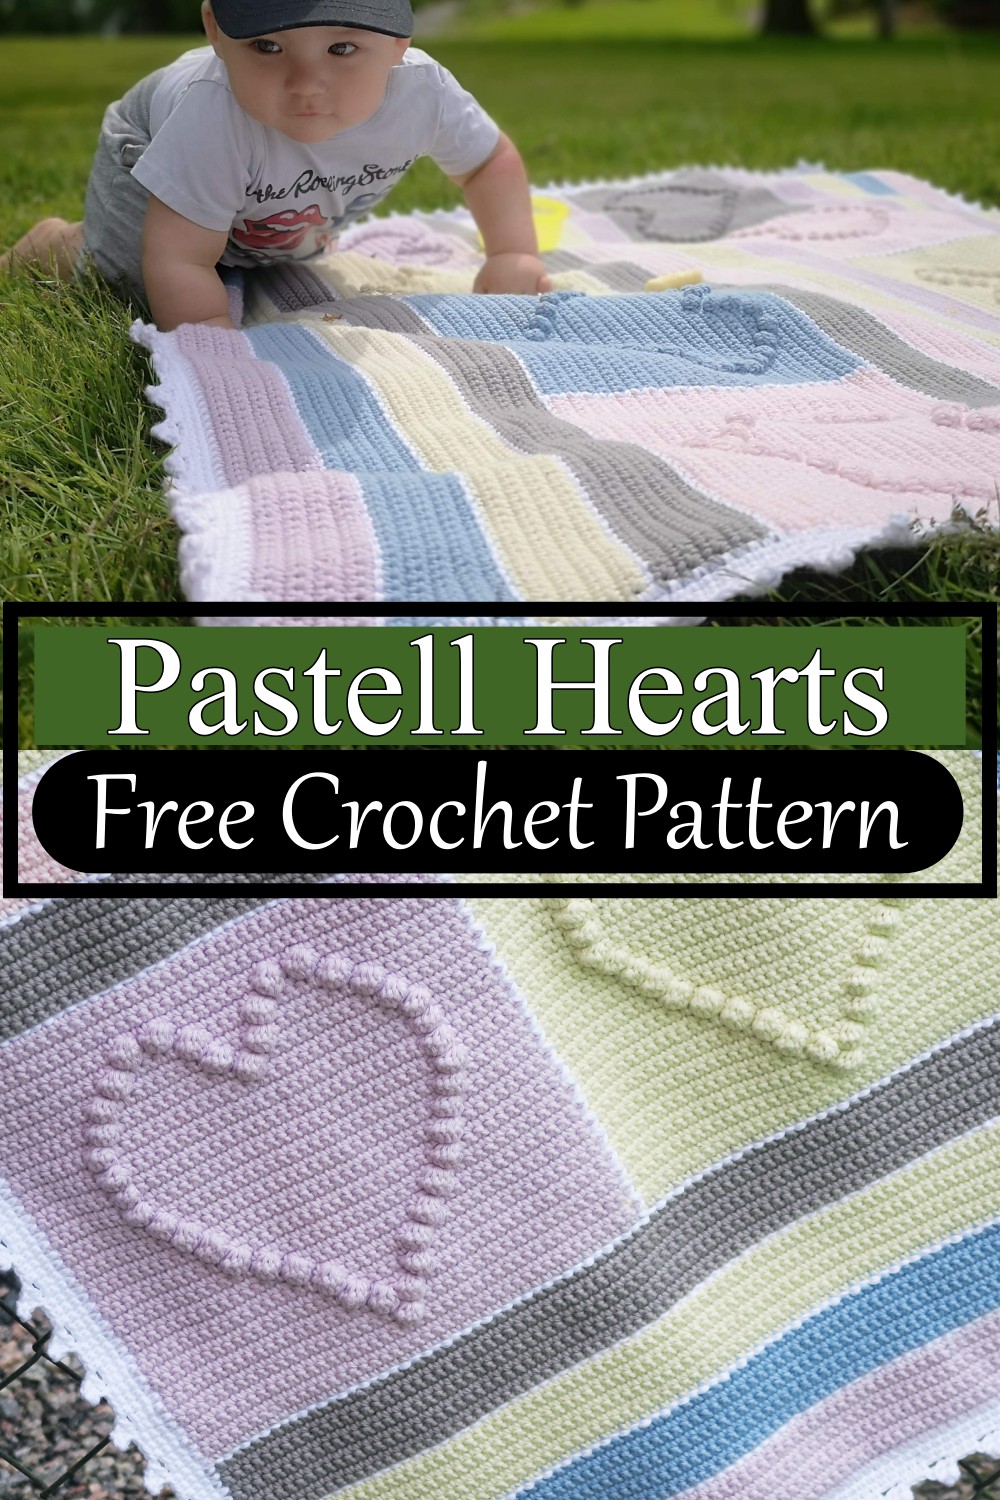 Pastell Hearts